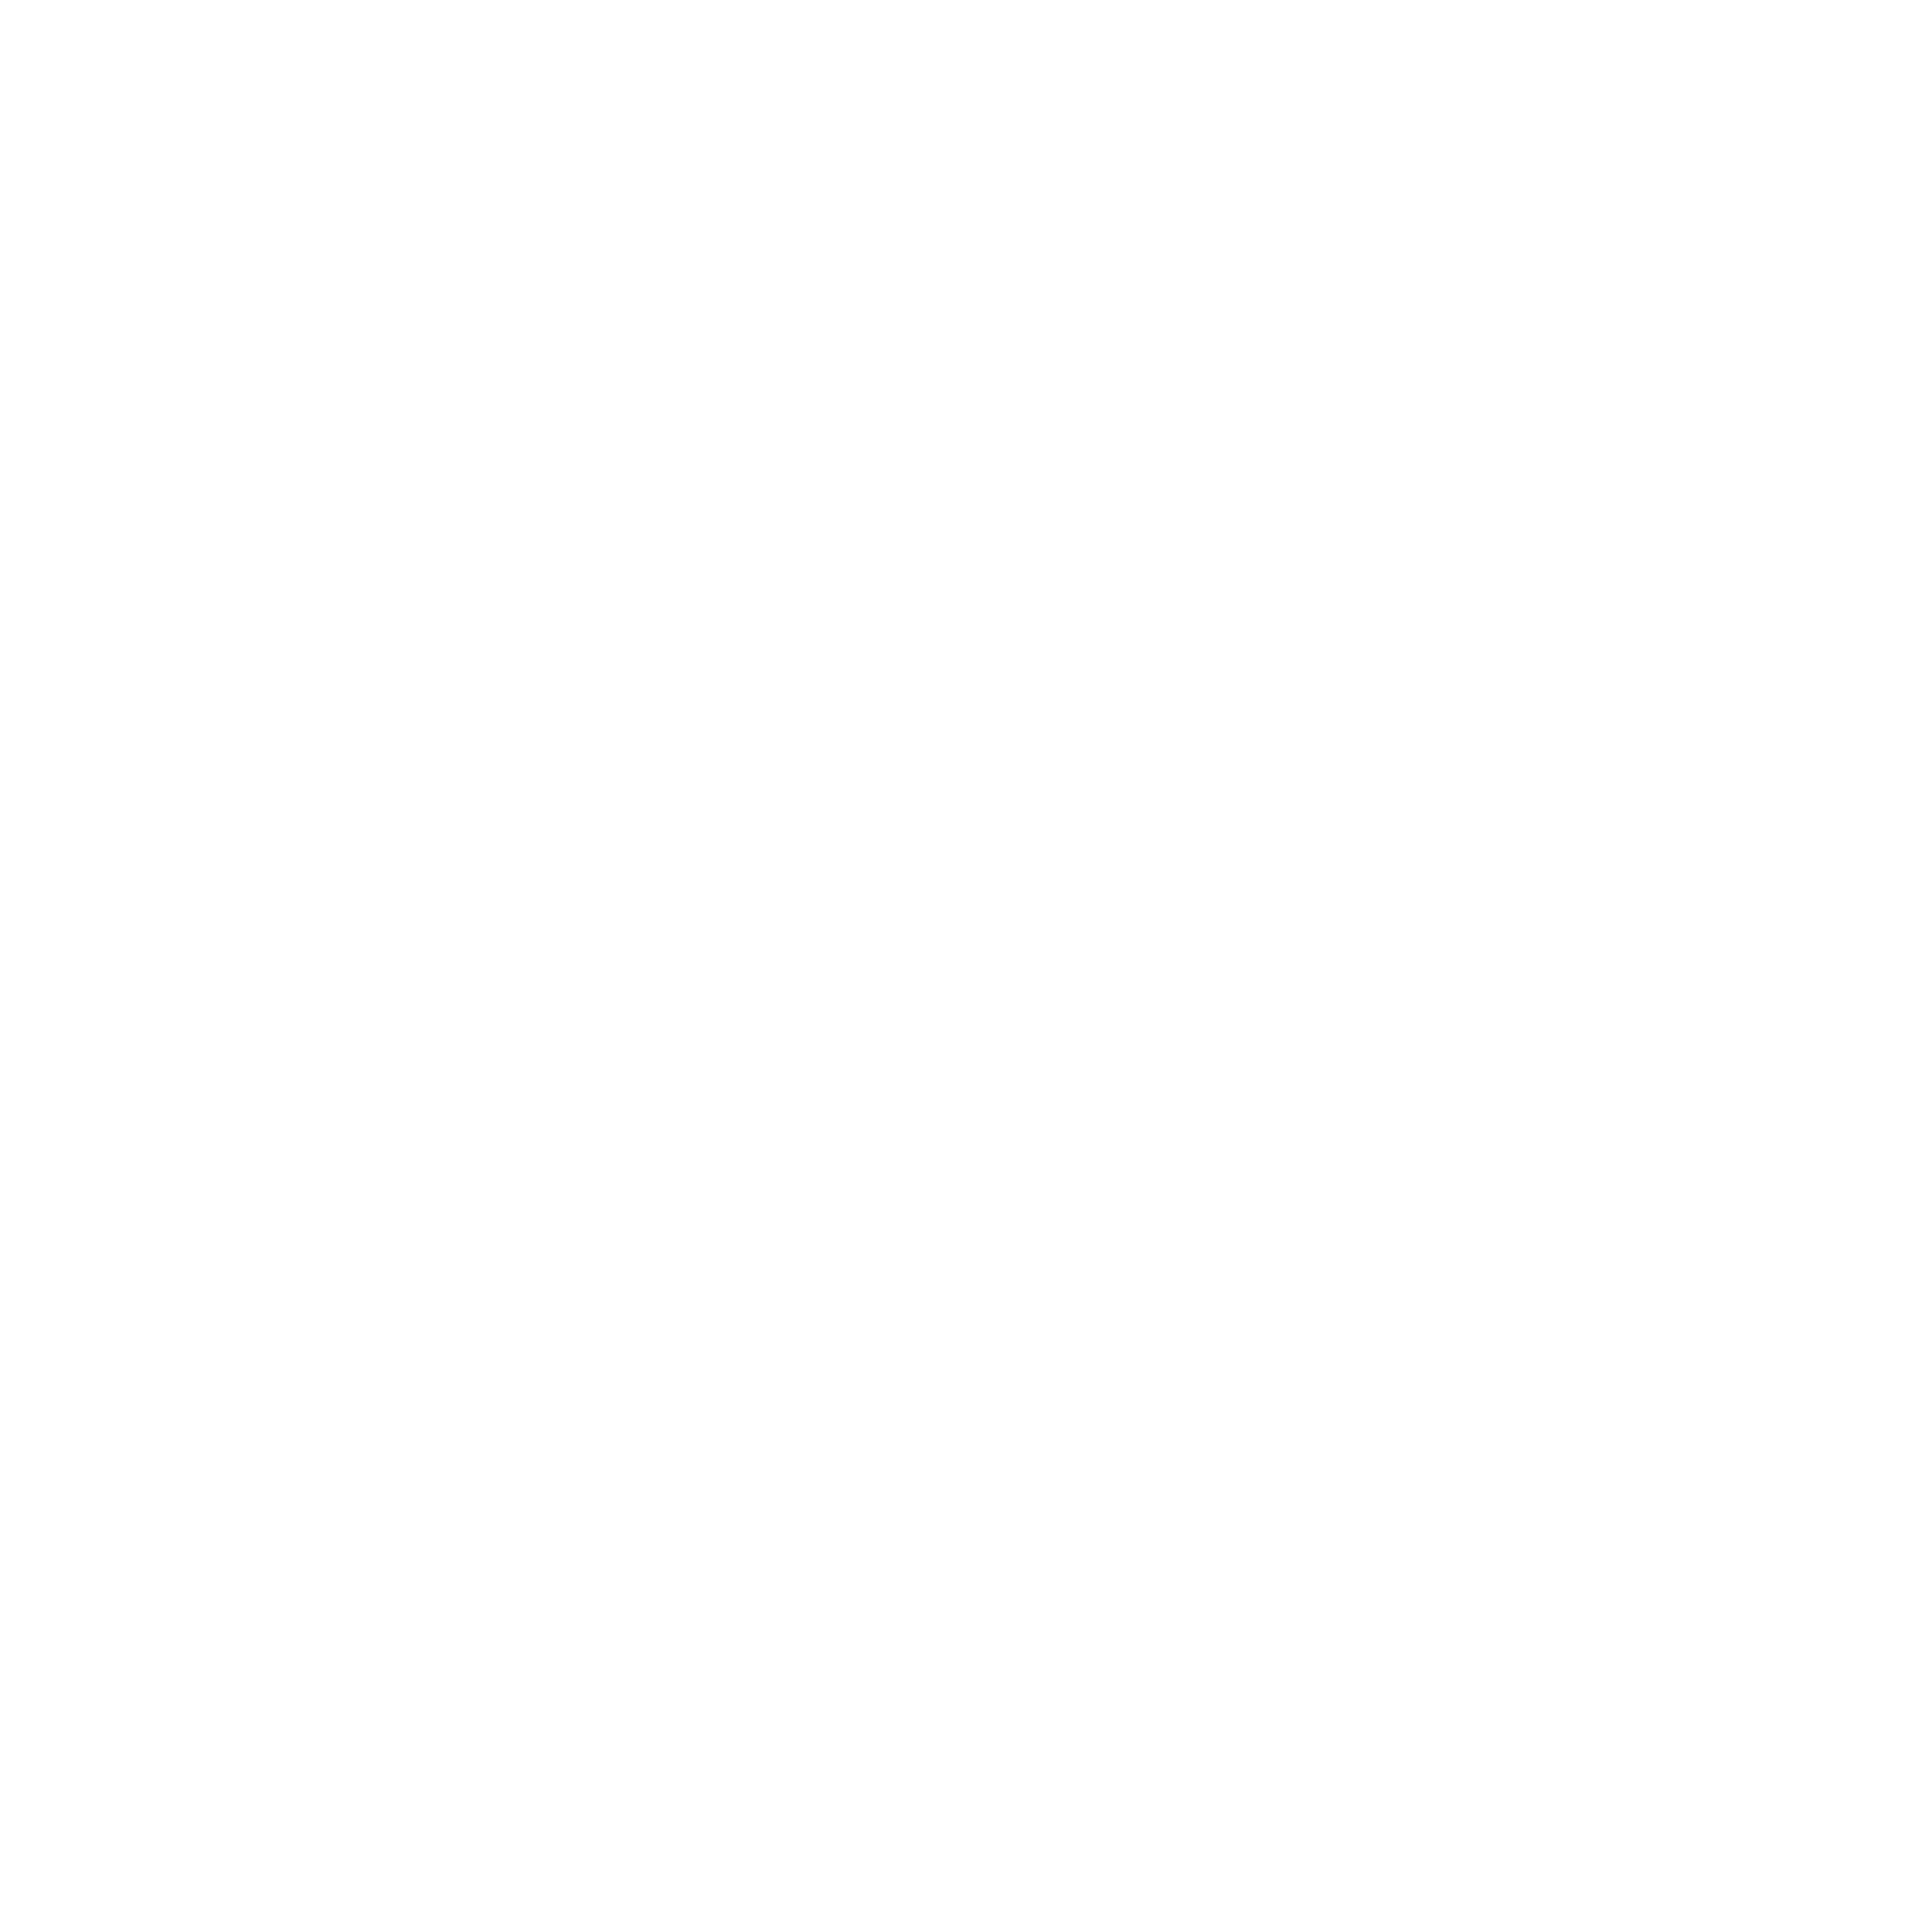 CRES Community is a Top-Rated Coworking Space in Tampa, FL